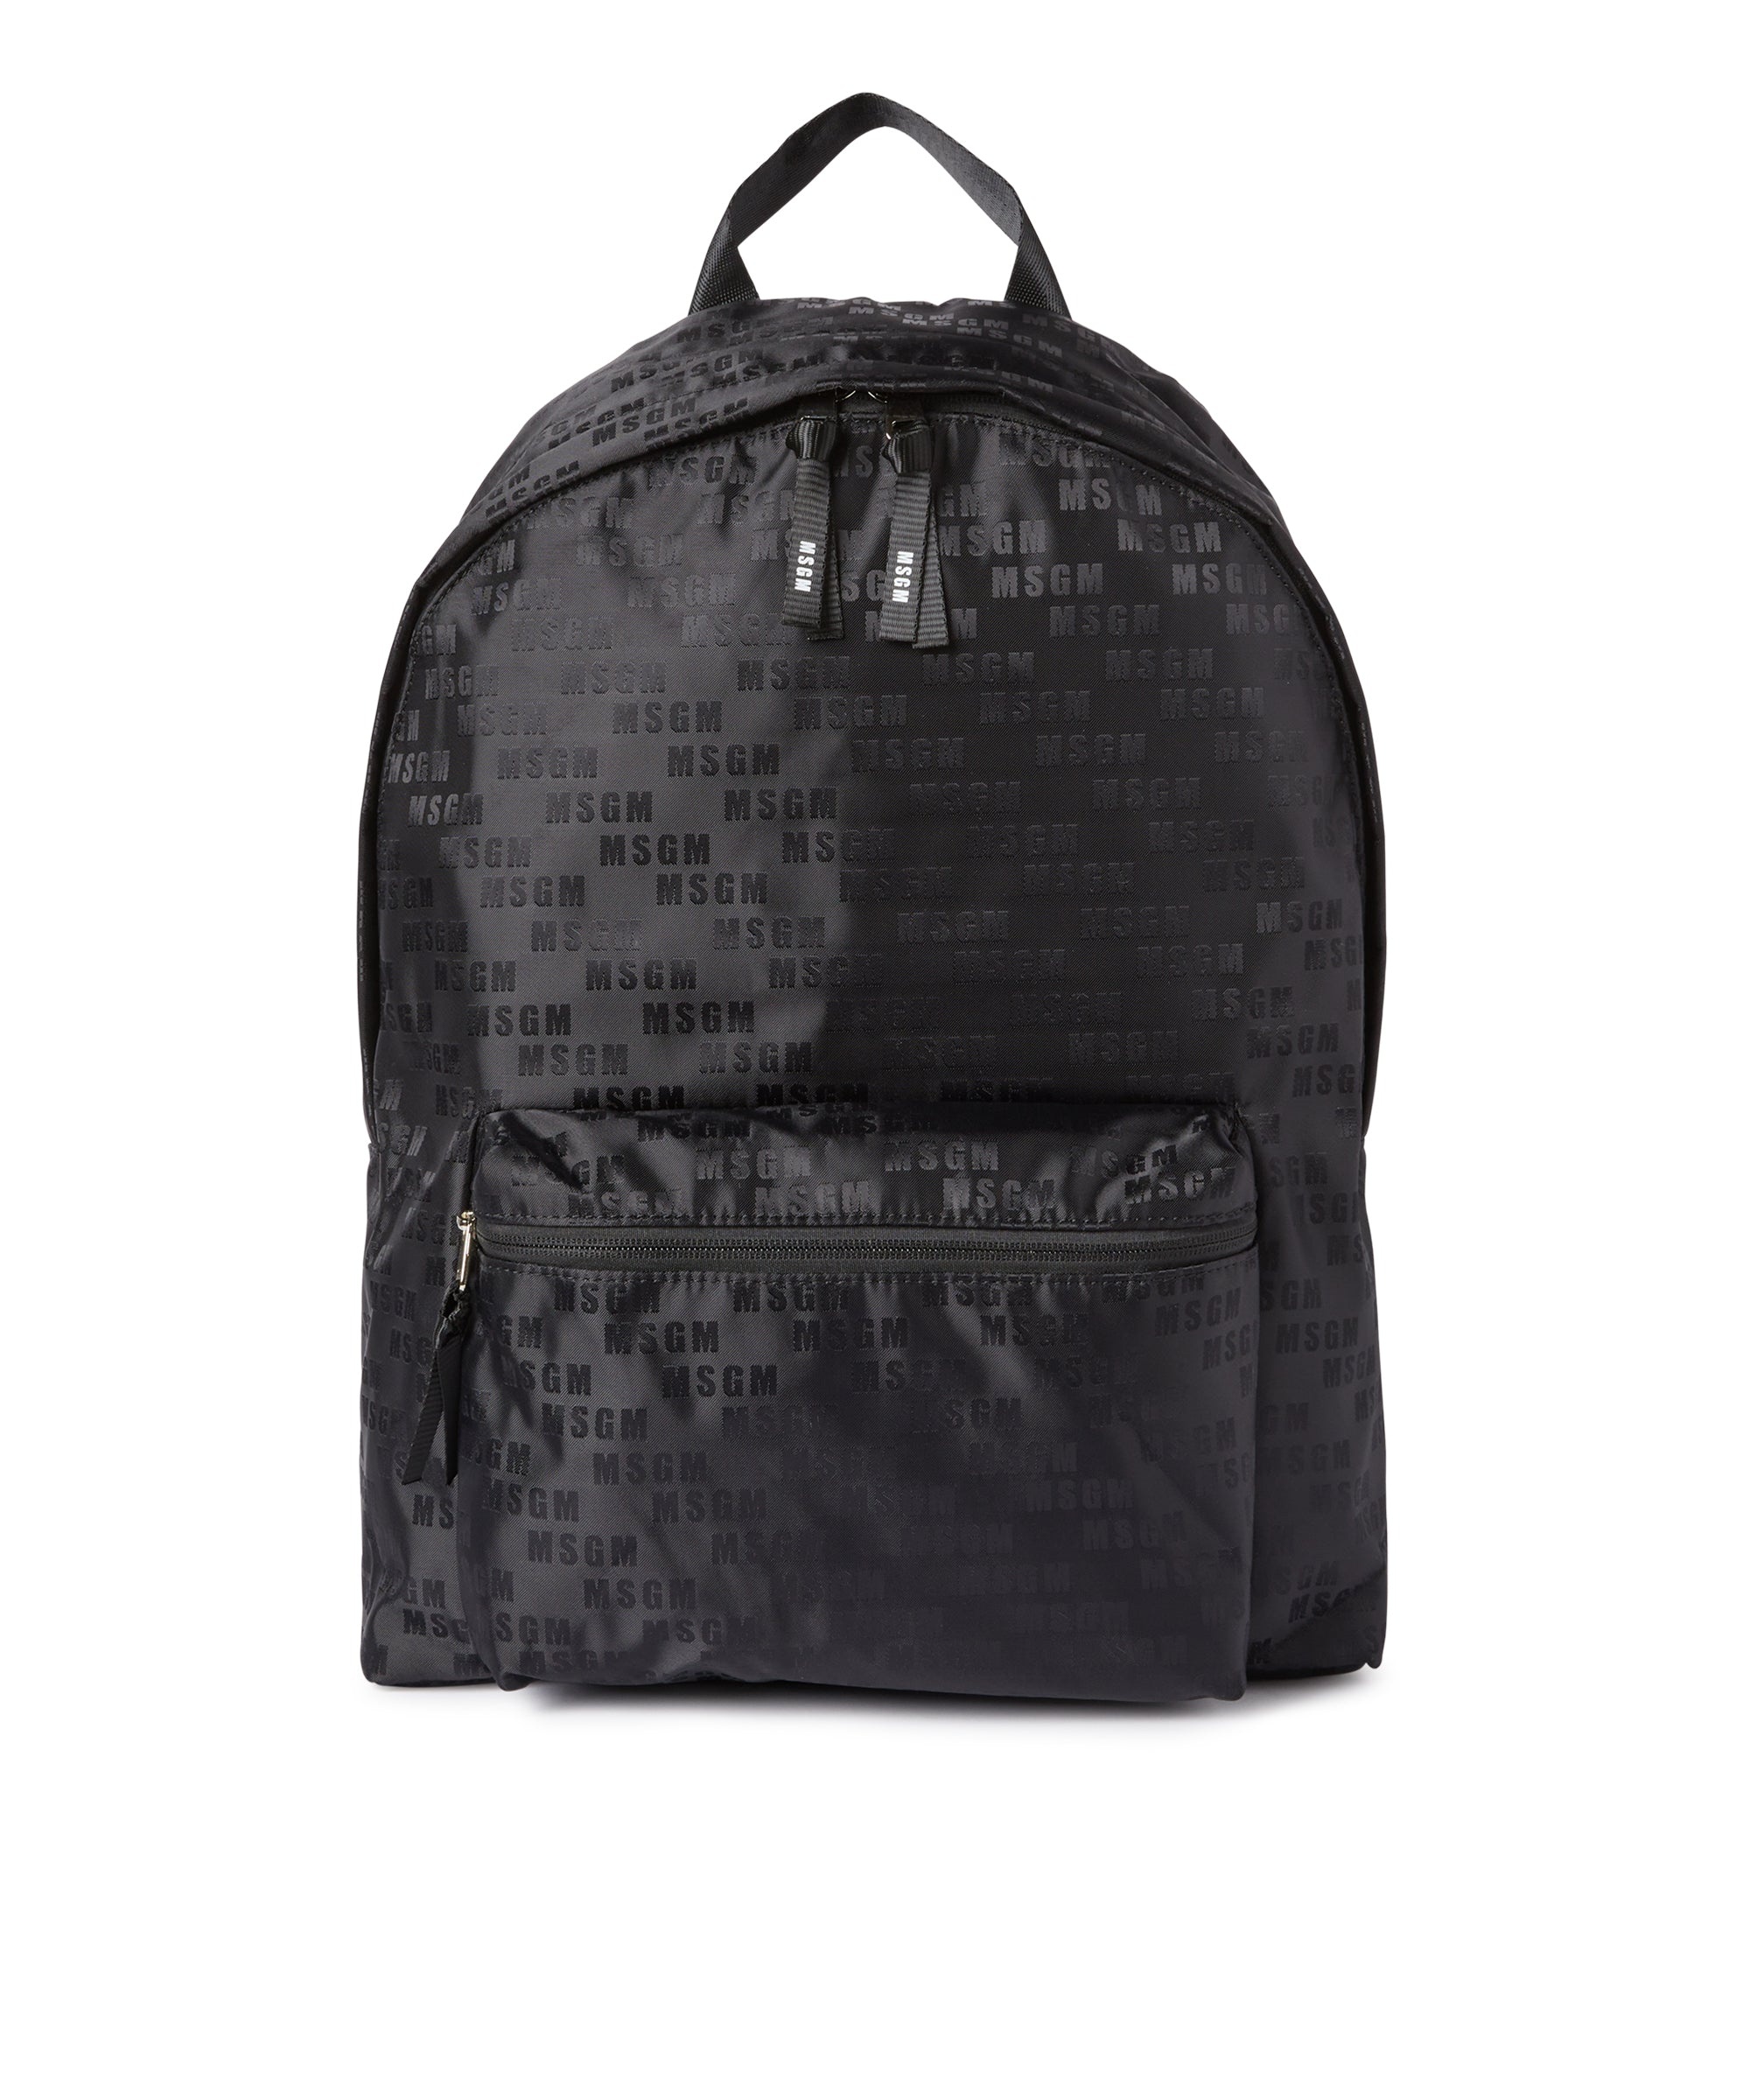 "Signature Iconic Nylon" backpack with all-over print - 1